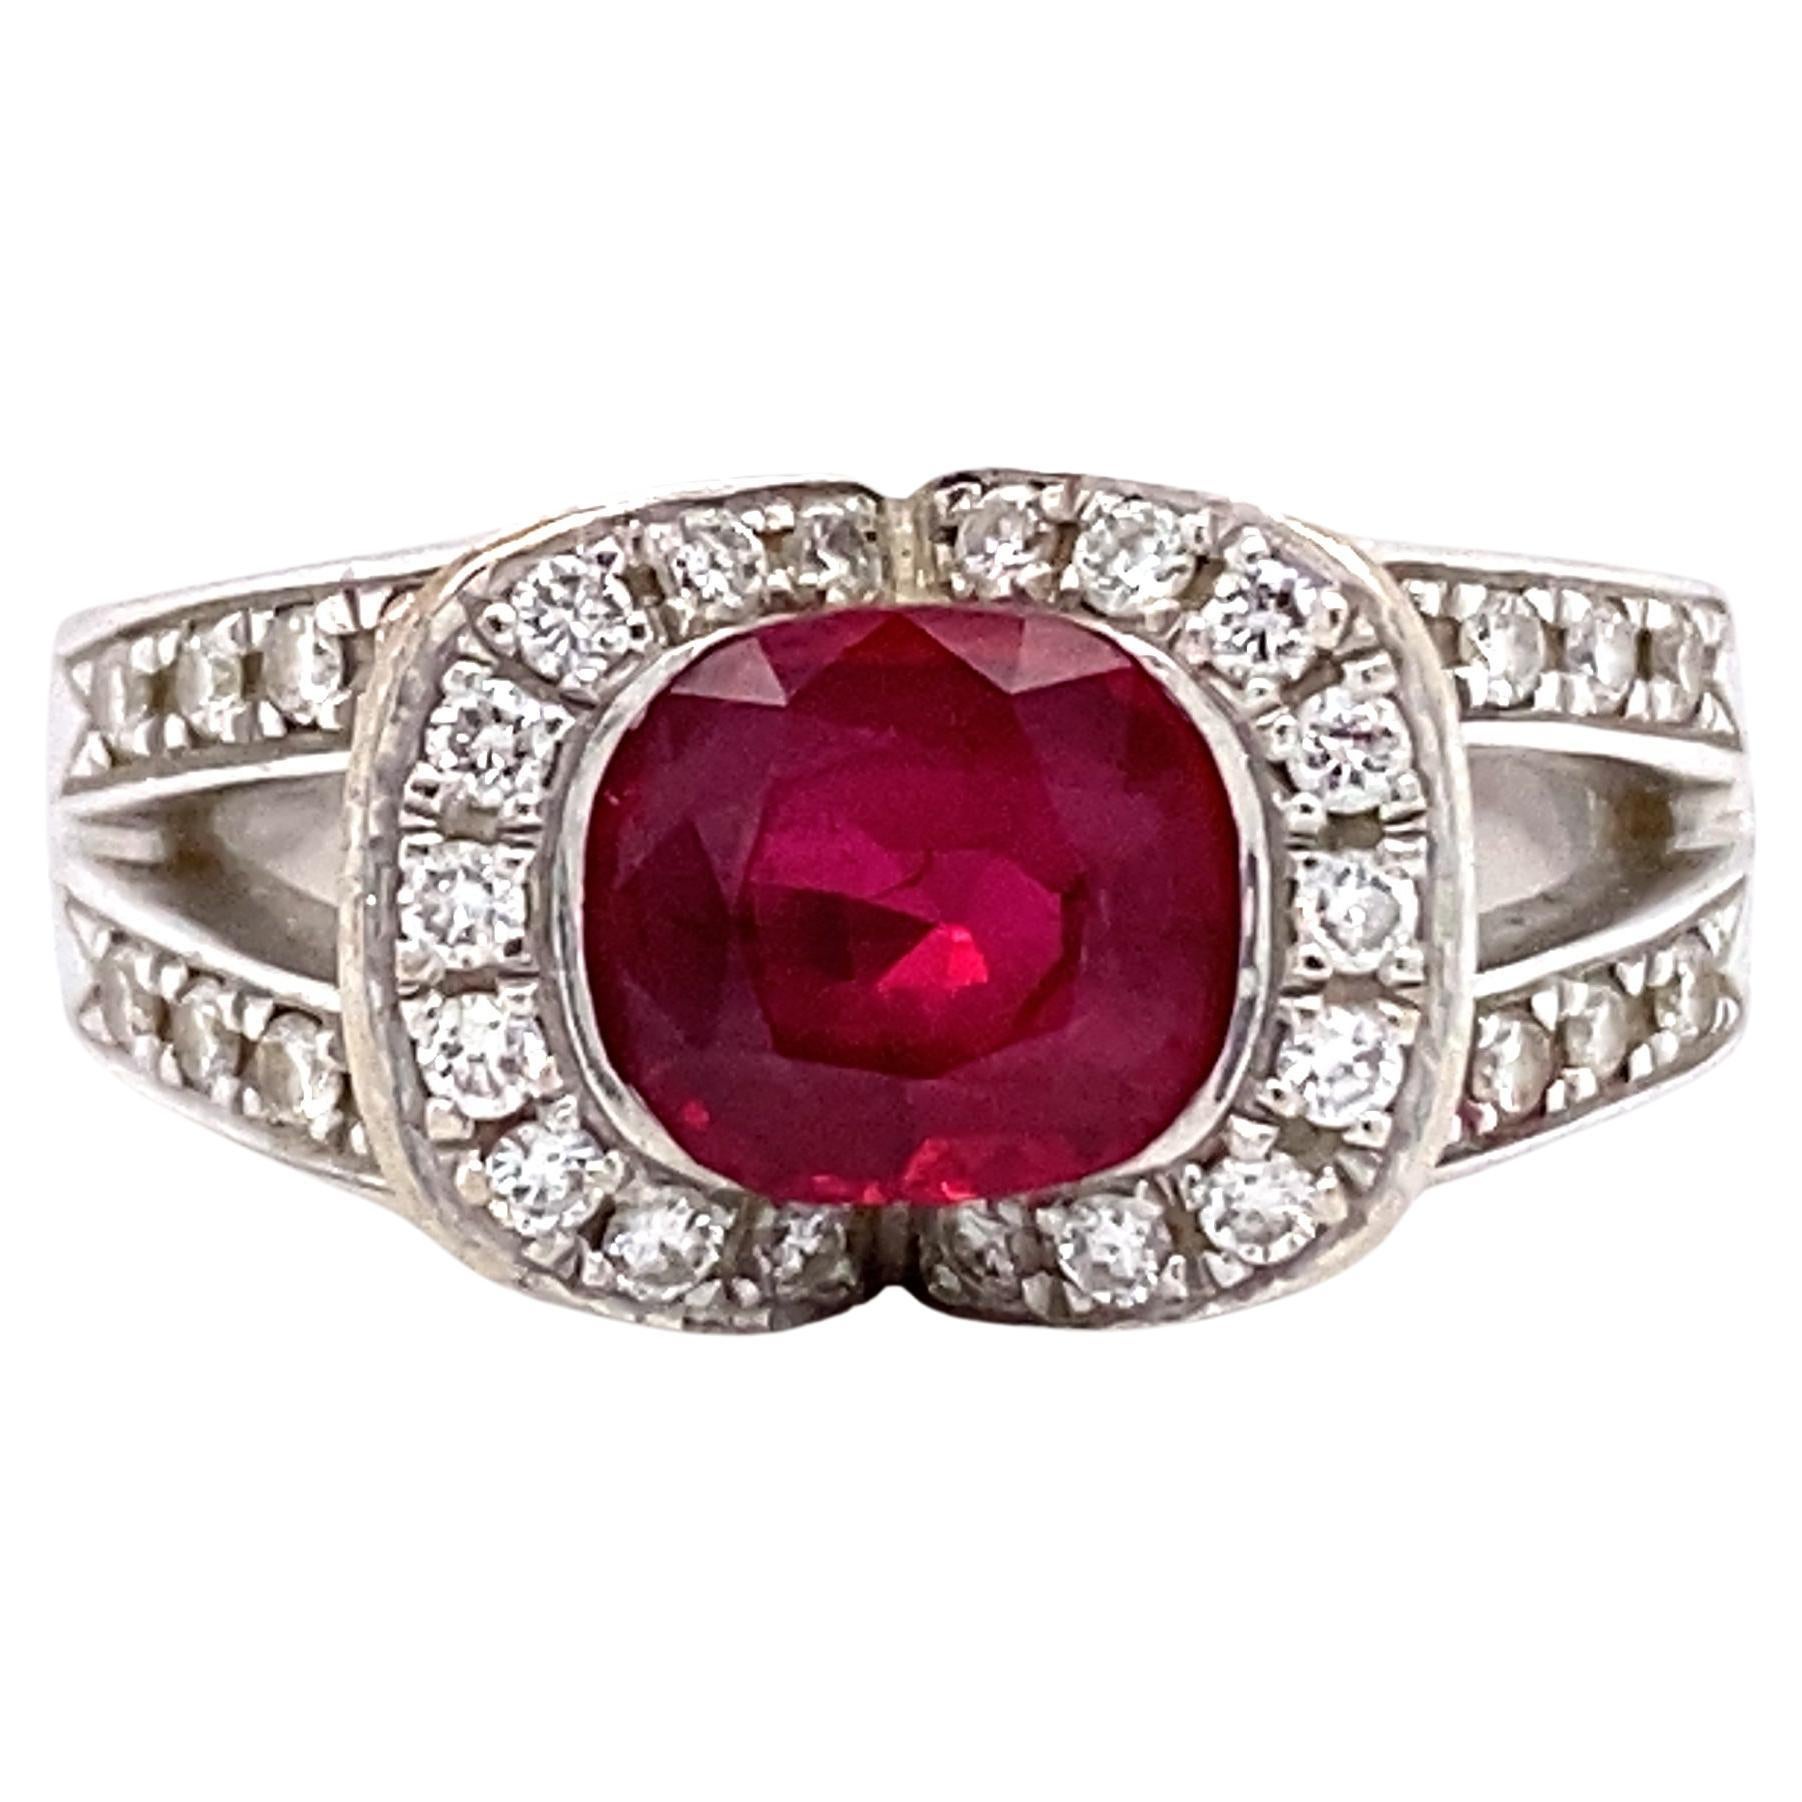 1990s French 1.20 Carat Oval Ruby and Diamond Ring in Platinum